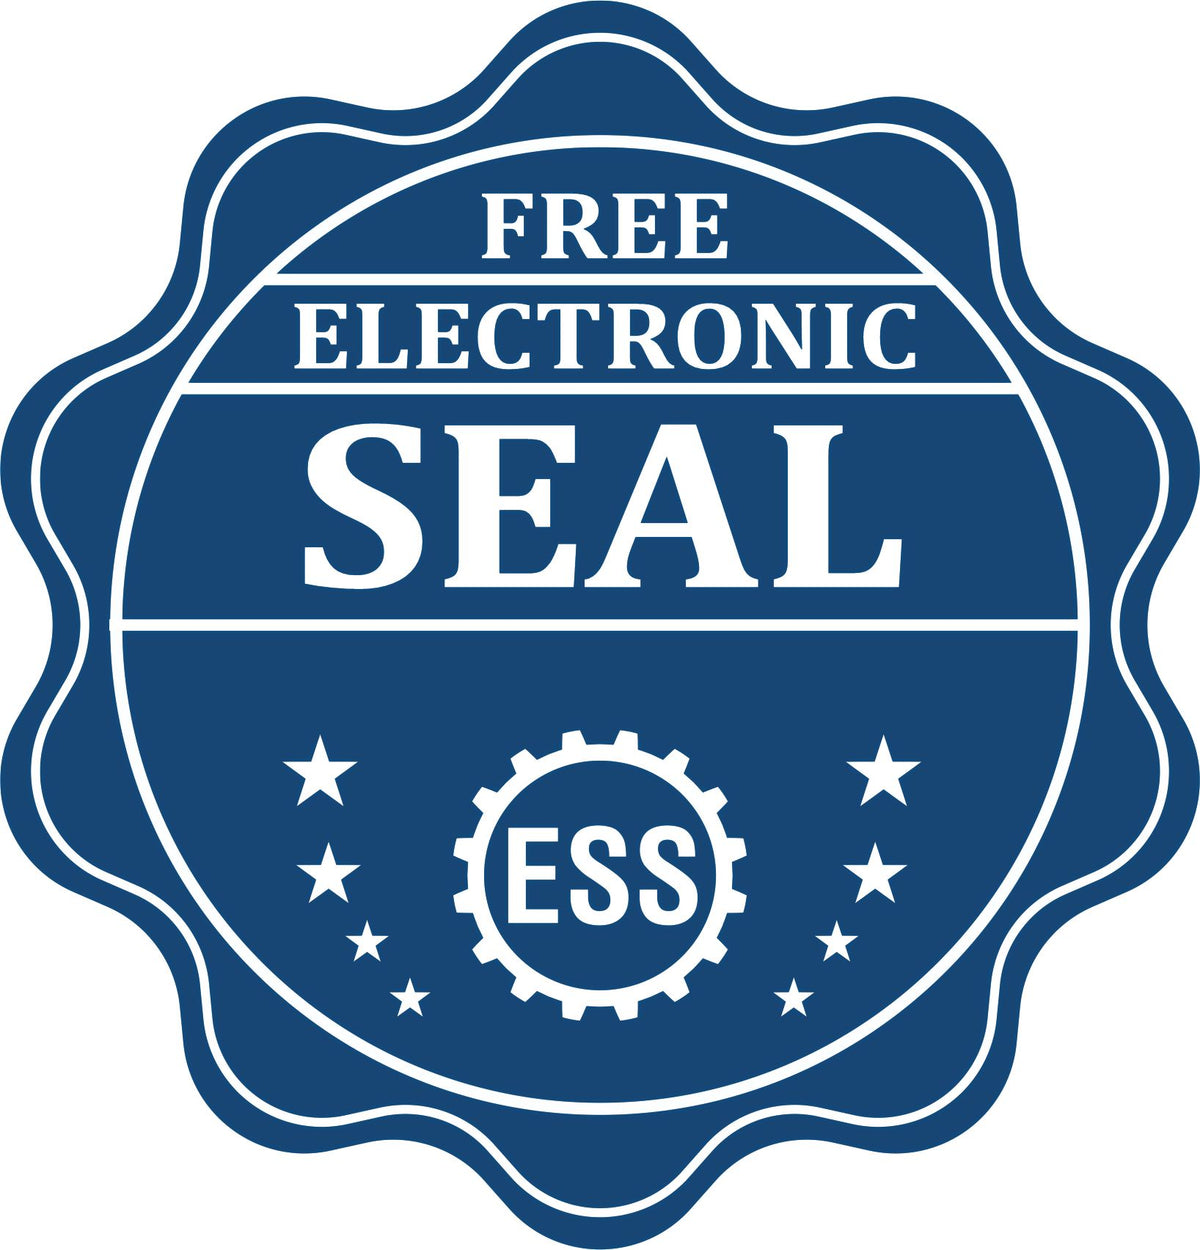 A badge showing a free electronic seal for the Premium MaxLight Pre-Inked Kansas Landscape Architectural Stamp with stars and the ESS gear on the emblem.